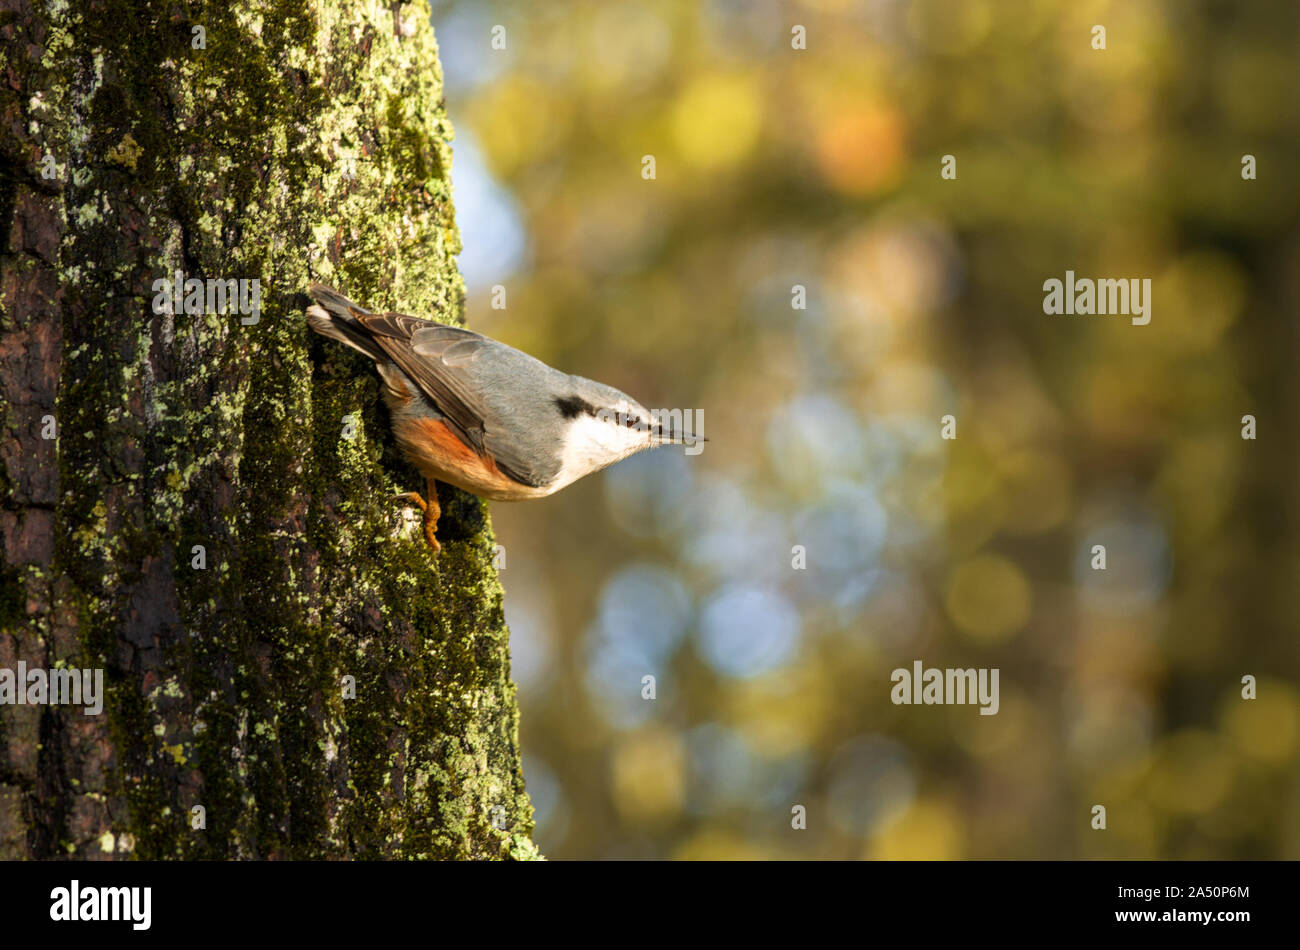 Nuthatch extended its beak clinging to the bark of a large tree trunk against a beautiful blurred background in the autumn Stock Photo